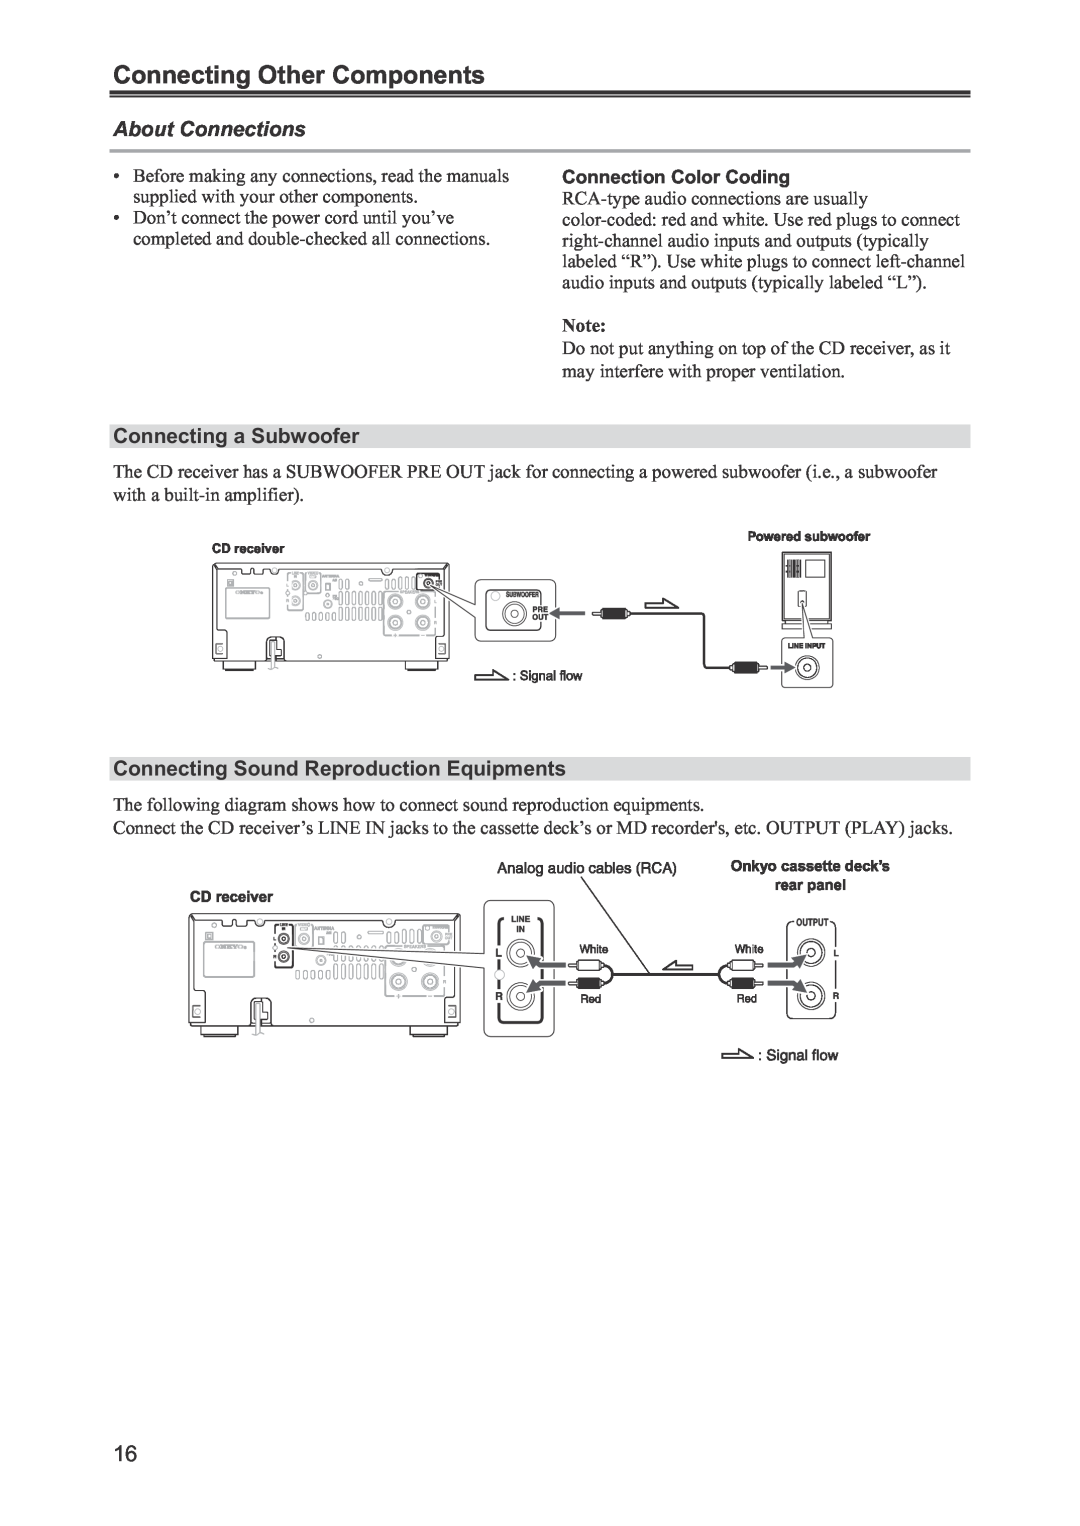 Onkyo CR-445 instruction manual Connecting Other Components, About Connections, Connecting a Subwoofer 